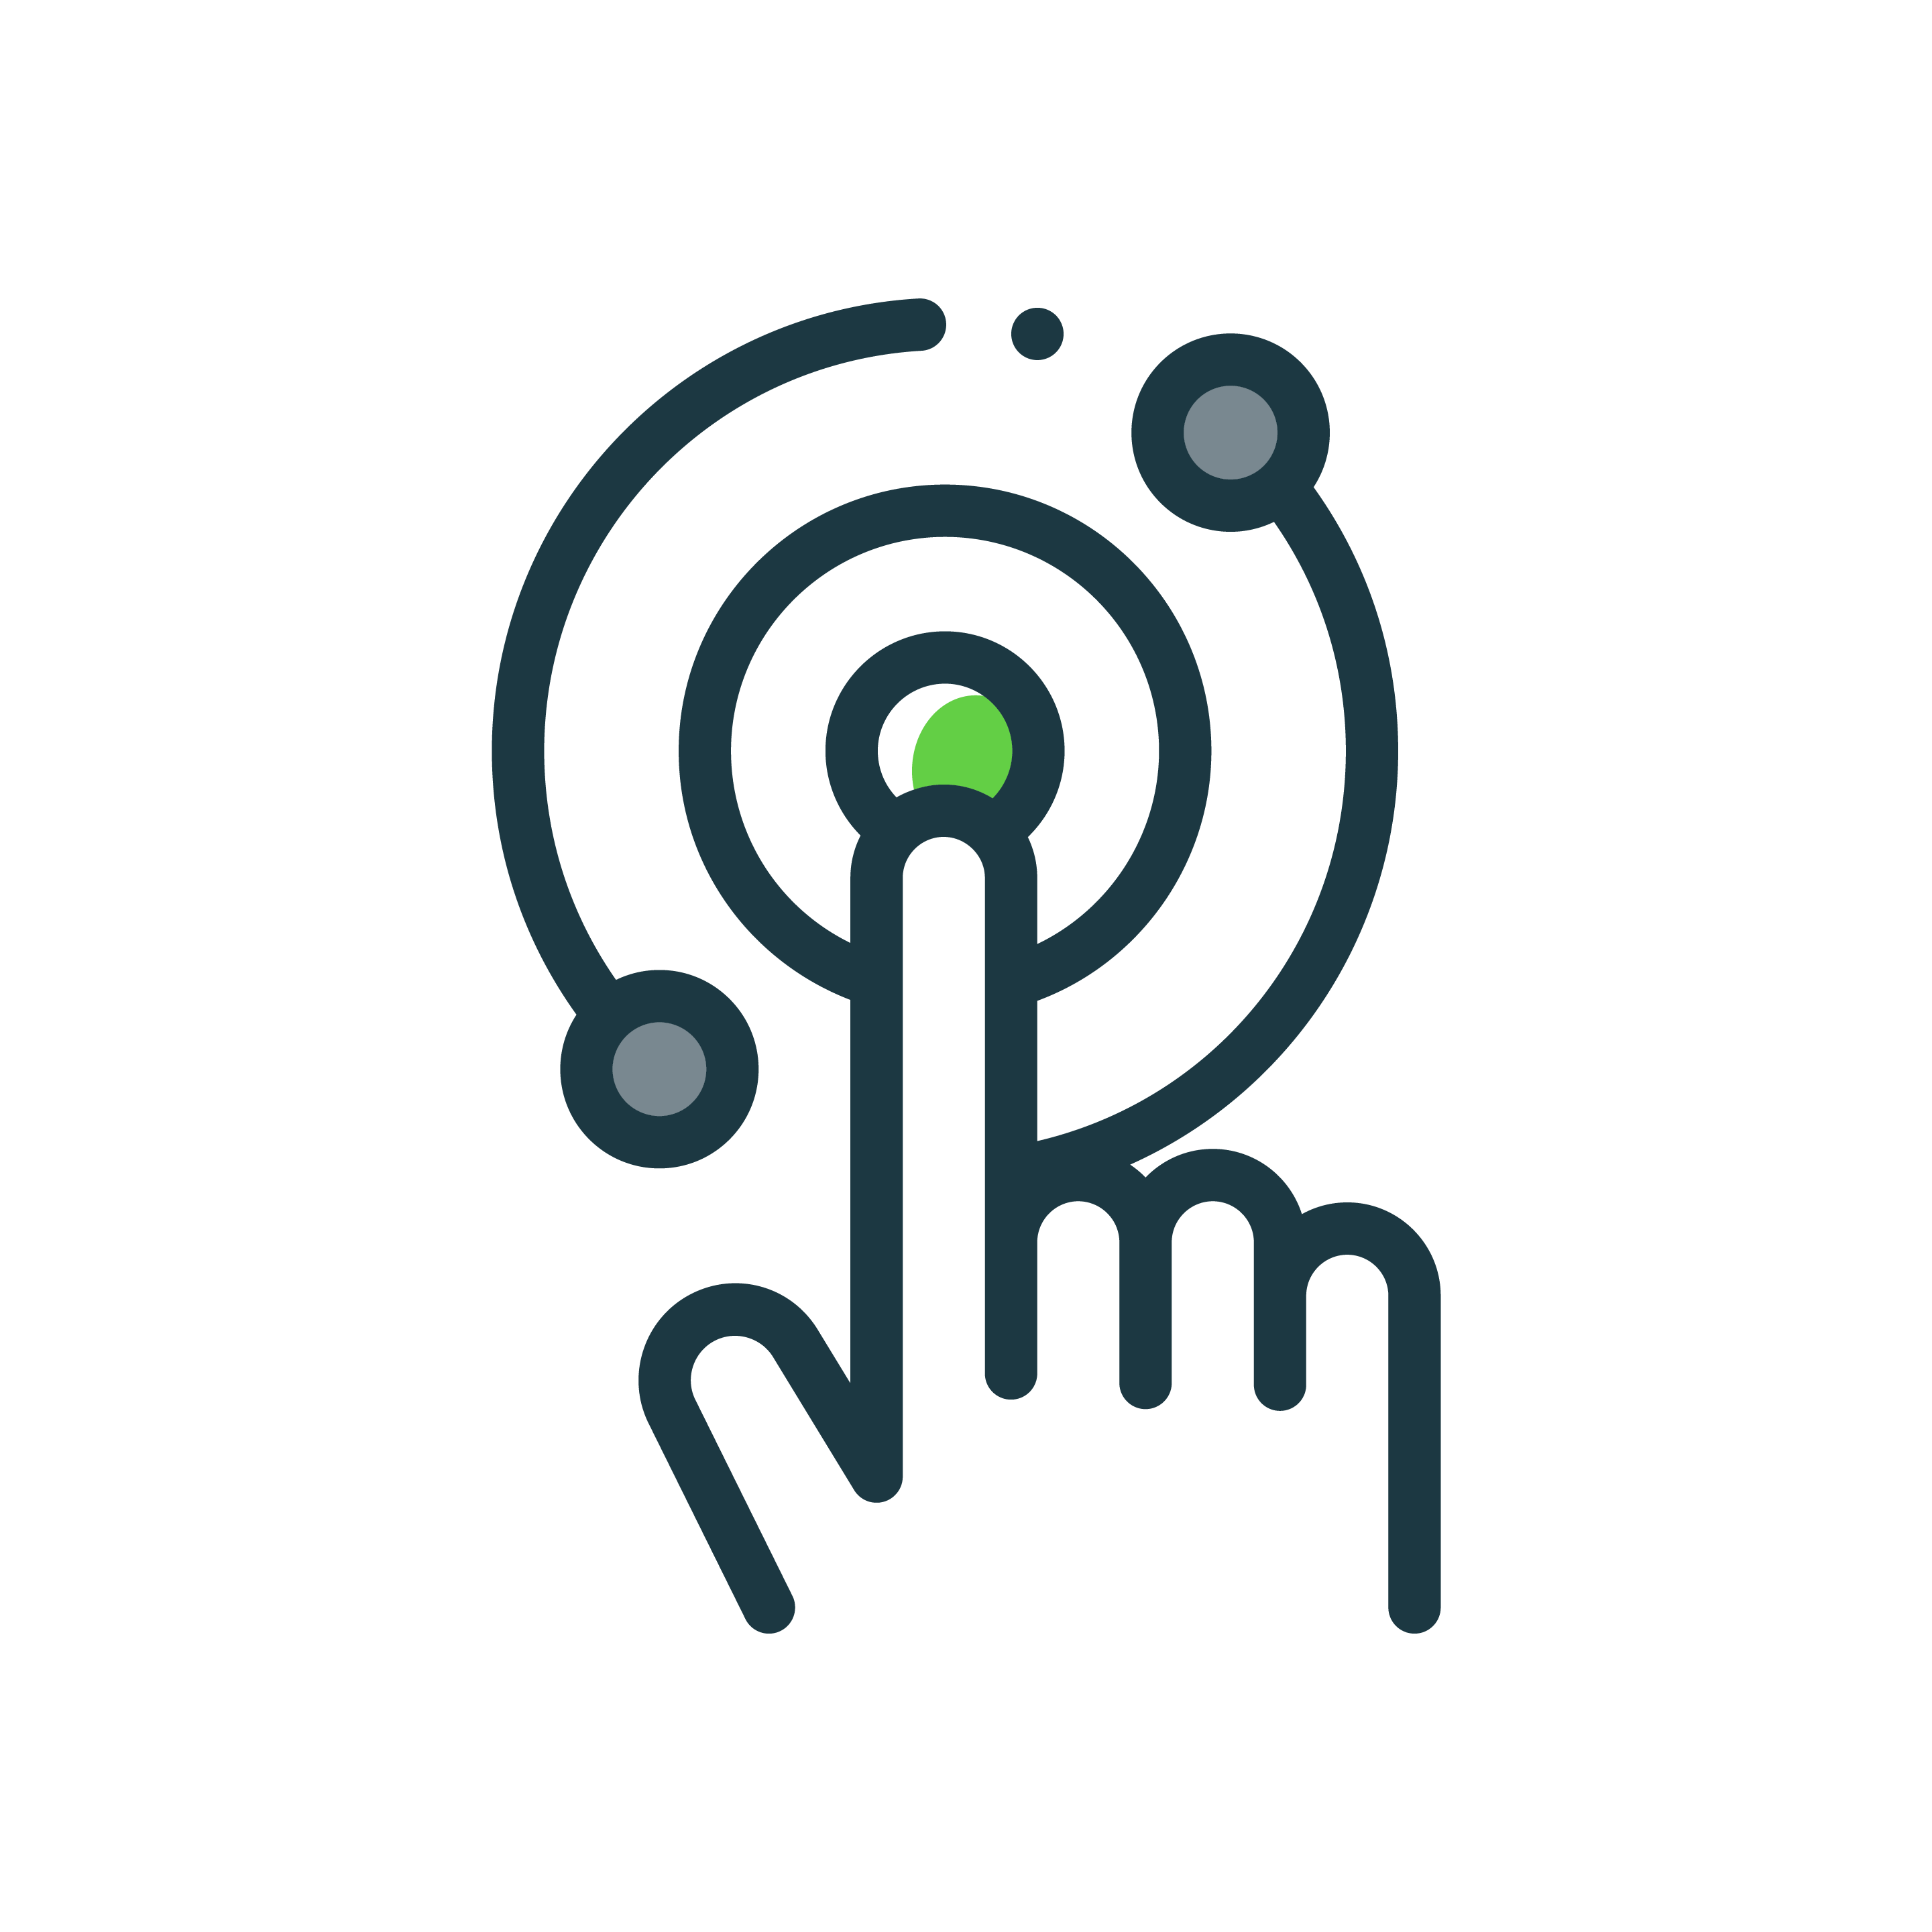 an icon showing a stylised hand tapping into the center of an ring structure wiith circles orbiting a the green circle in the middle